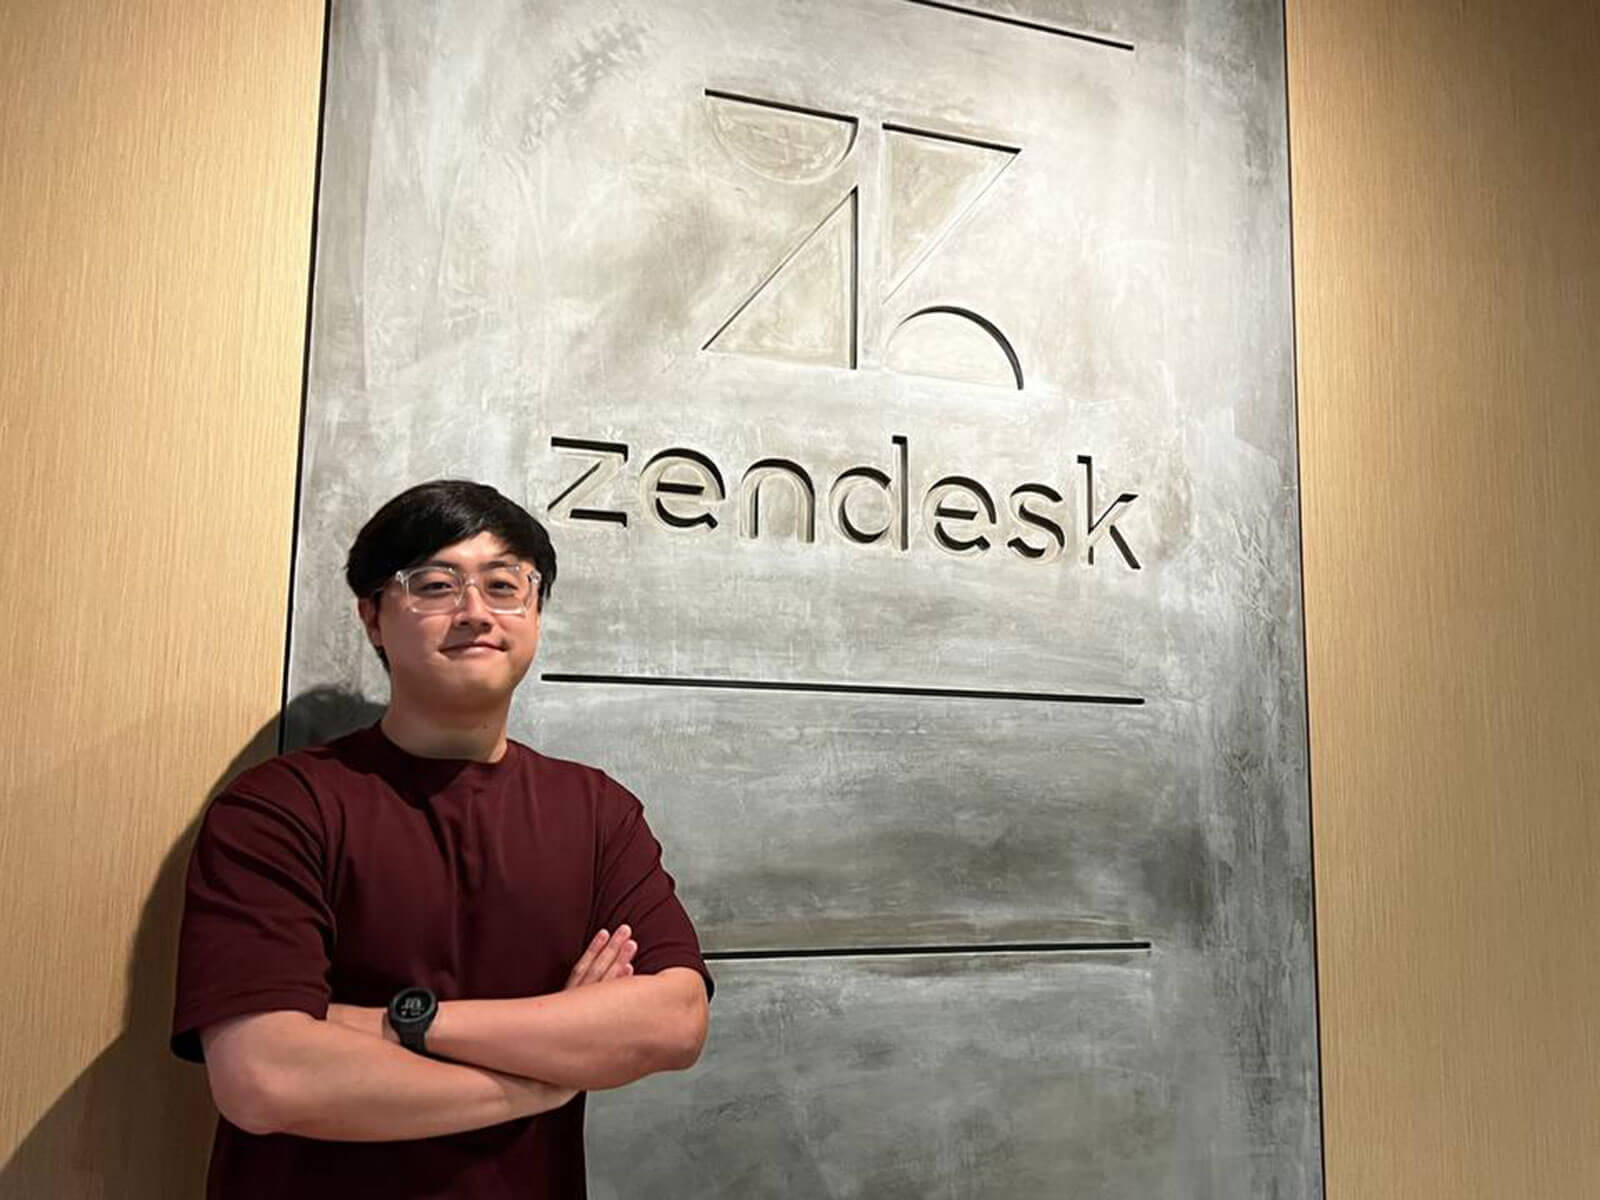 Alumnus Lim Kay Hwee poses in front of a Zendesk logo sign.